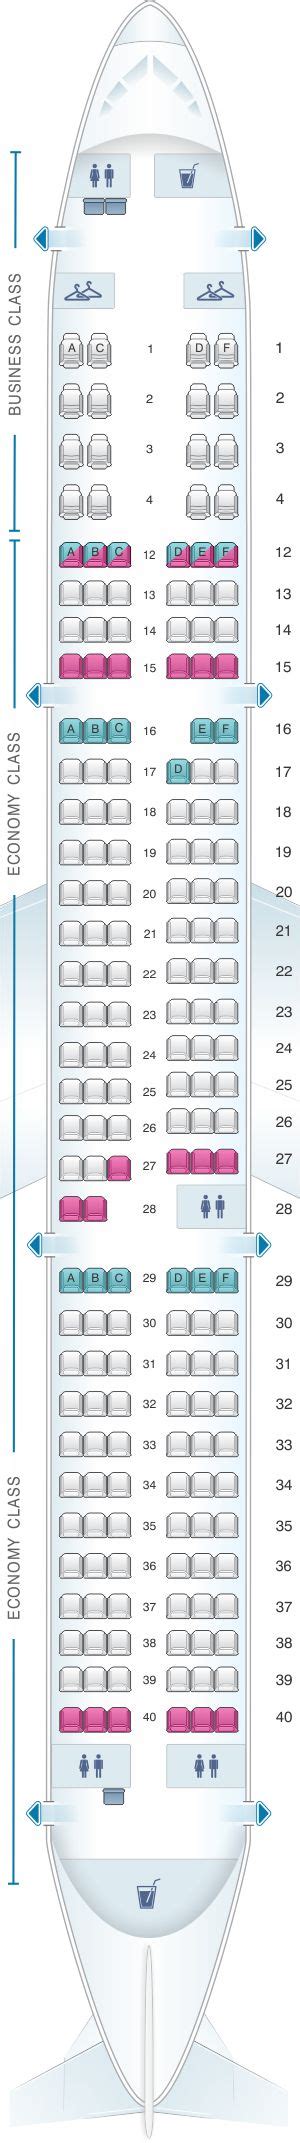 Seat Map Air Canada Airbus A321 200 Layout 1 Airline Seats Seating